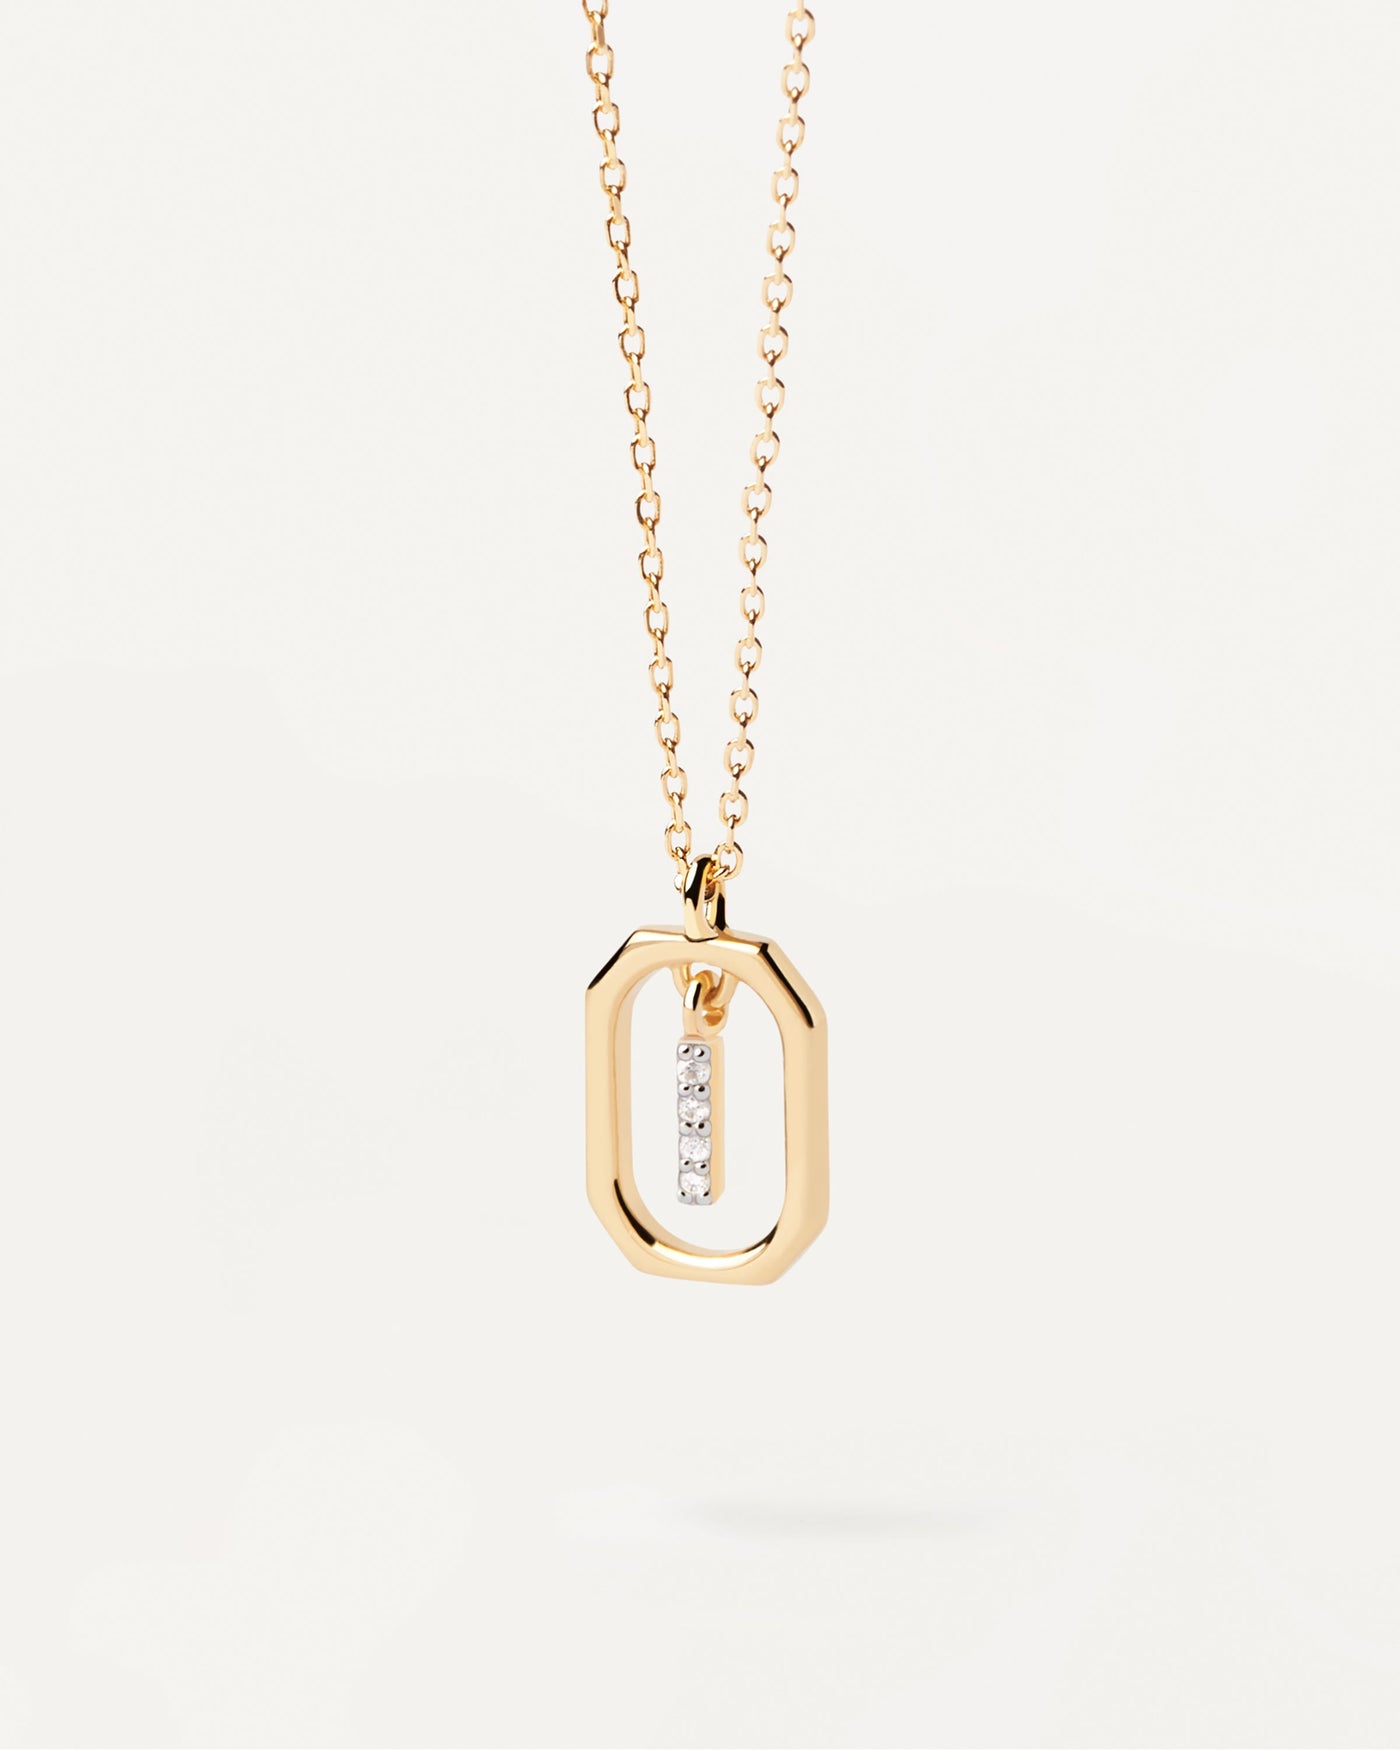 2023 Selection | Mini Letter I Necklace. Small initial I necklace in zirconia inside gold-plated silver octagonal pendant. Get the latest arrival from PDPAOLA. Place your order safely and get this Best Seller. Free Shipping.